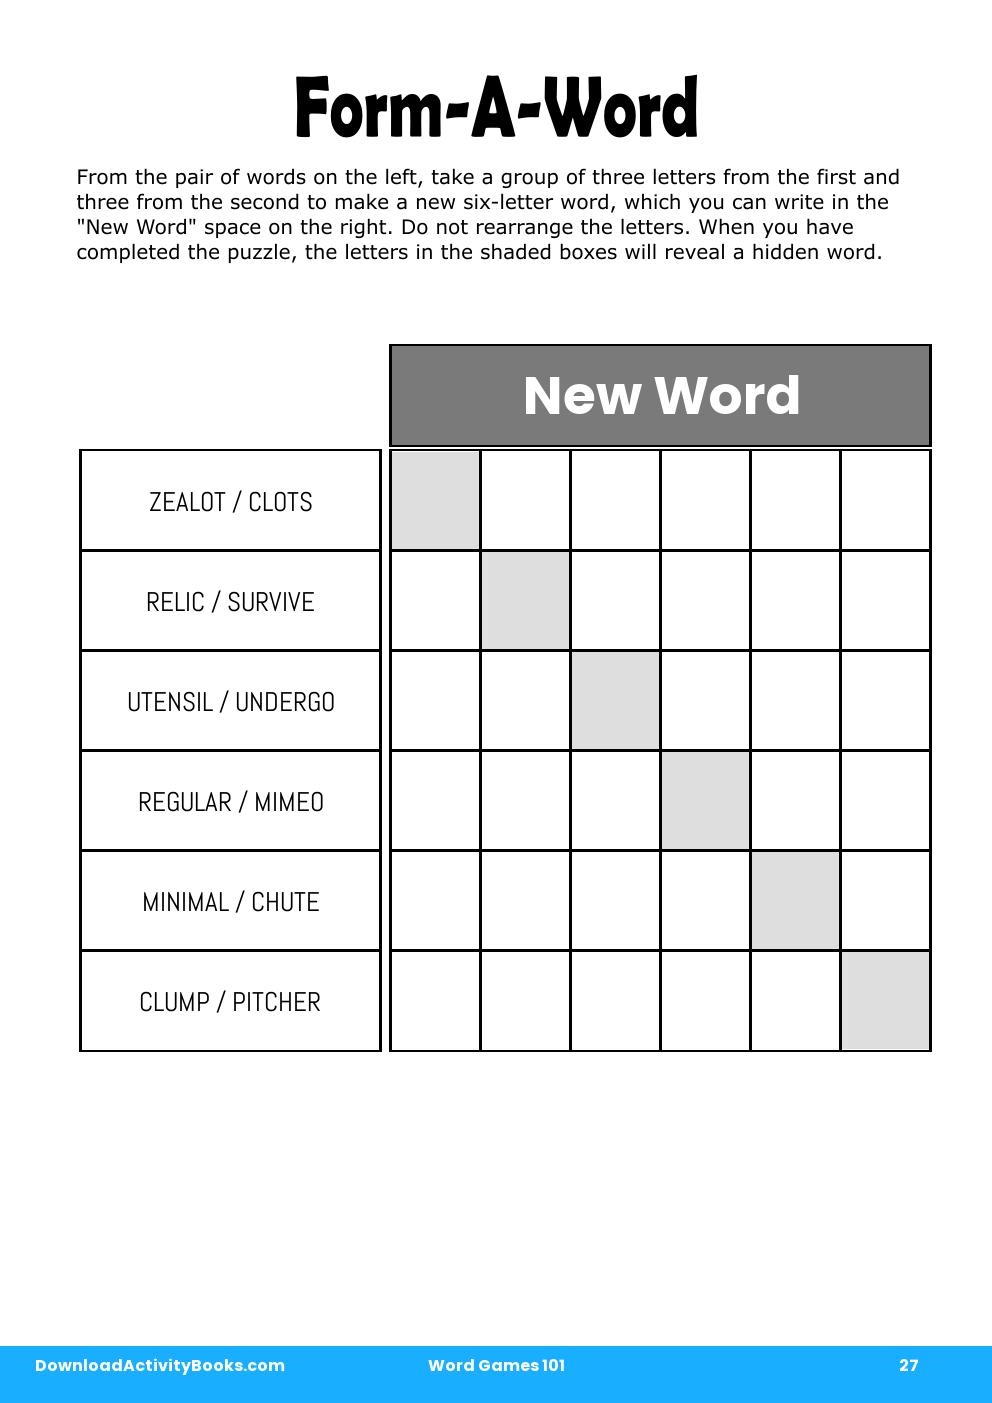 Form-A-Word in Word Games 101